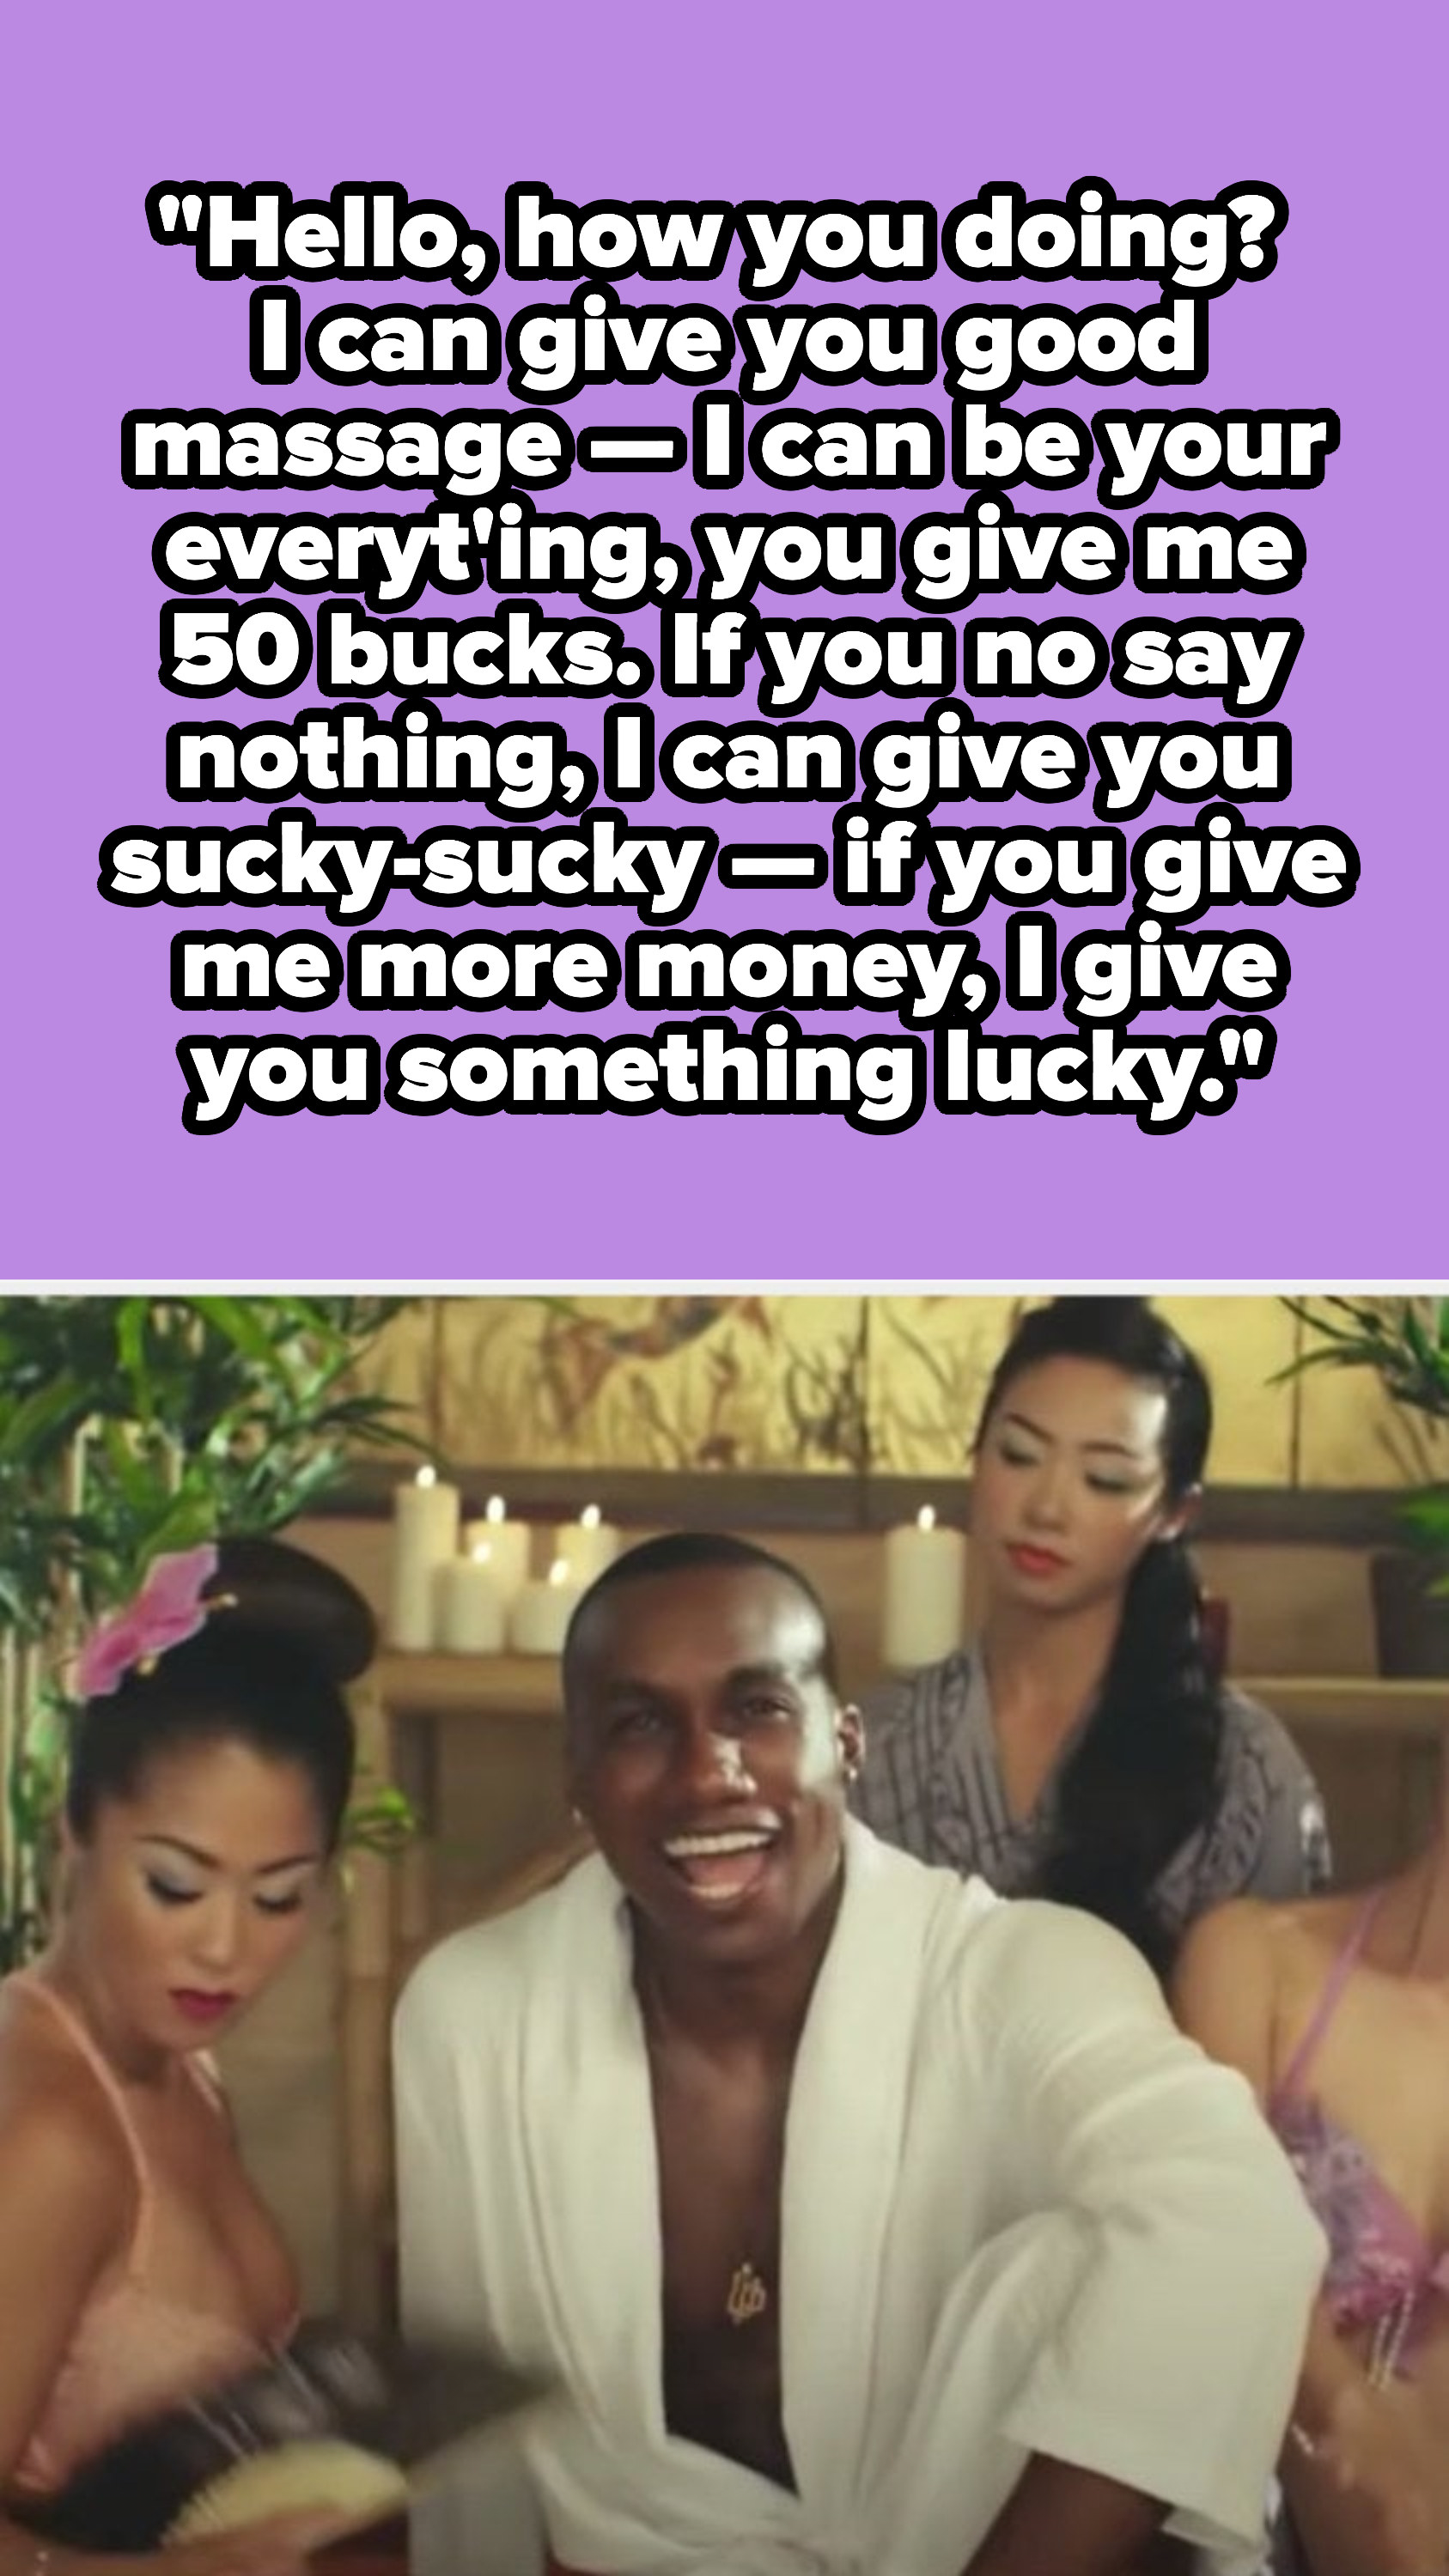 Hopsin lyrics: &quot;Hello, how you doing? I can give you good massage — I can be your everyt&#x27;ing, you give me 50 bucks. If you no say nothing, I can give you sucky-sucky — if you give me more money, I give you something lucky&quot;